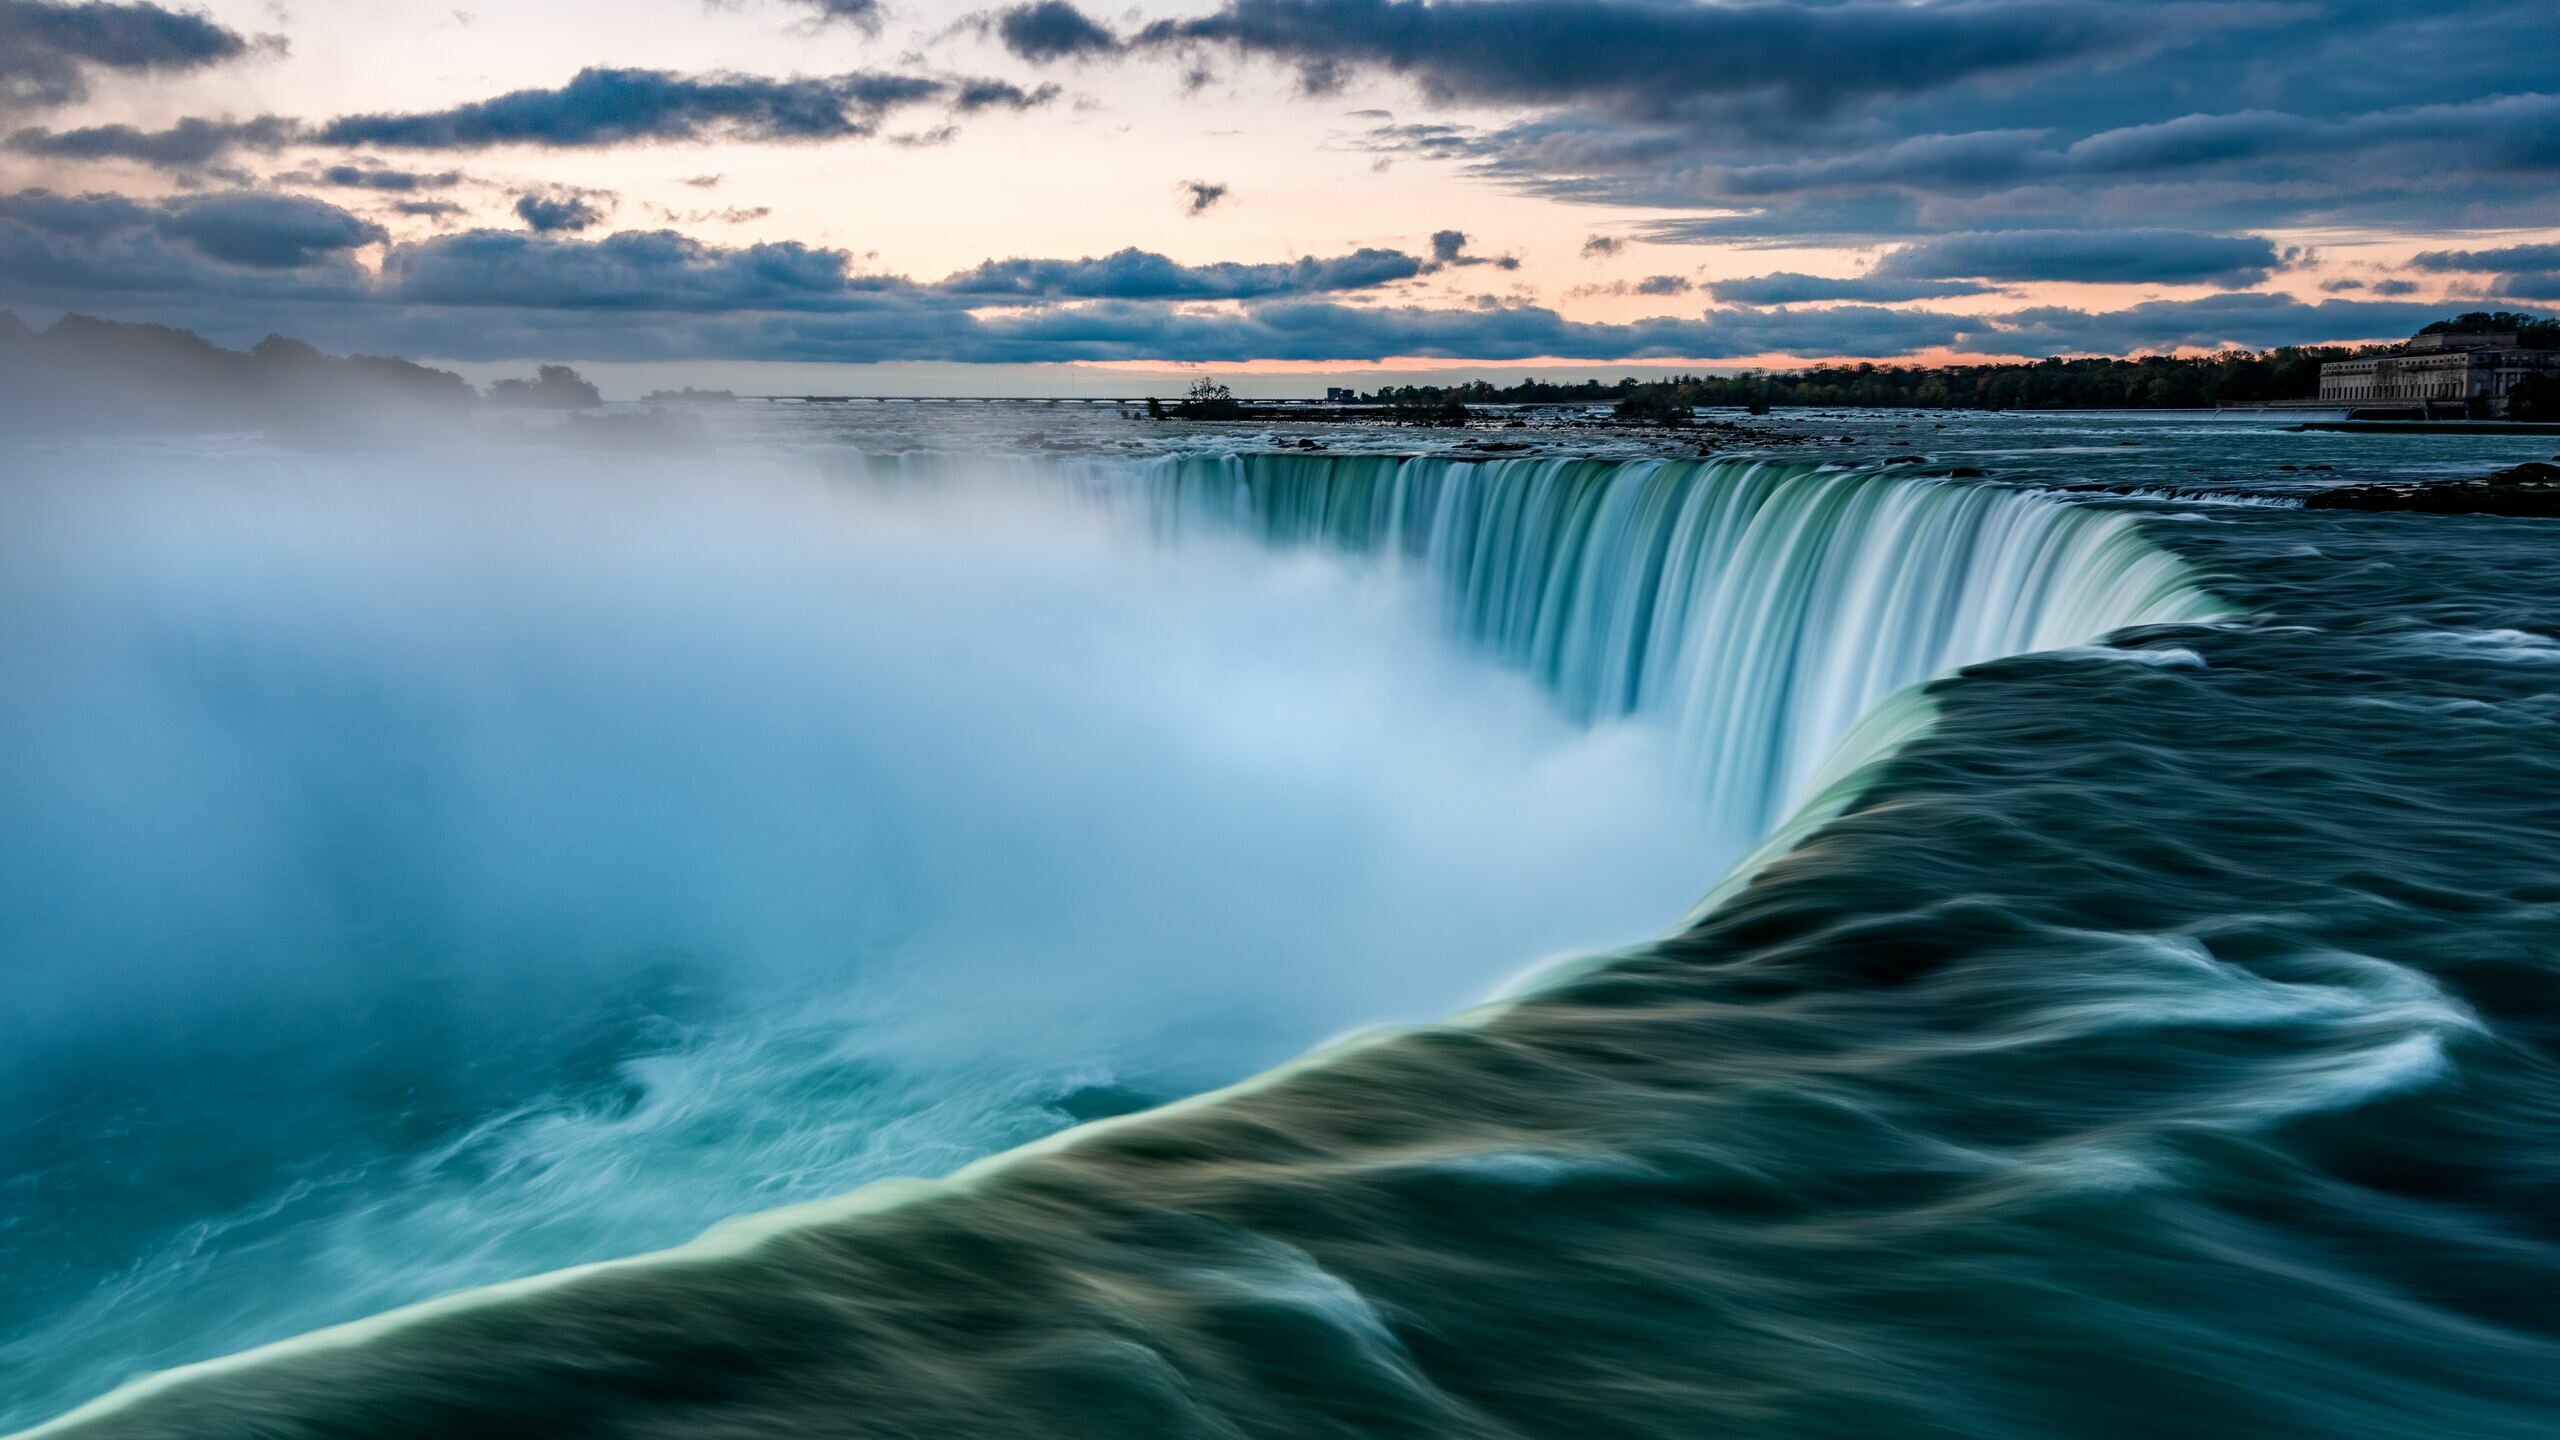 Niagara Falls: Three waterfalls that straddle the international border between the Canadian province of Ontario and the American state of New York. 2560x1440 HD Wallpaper.